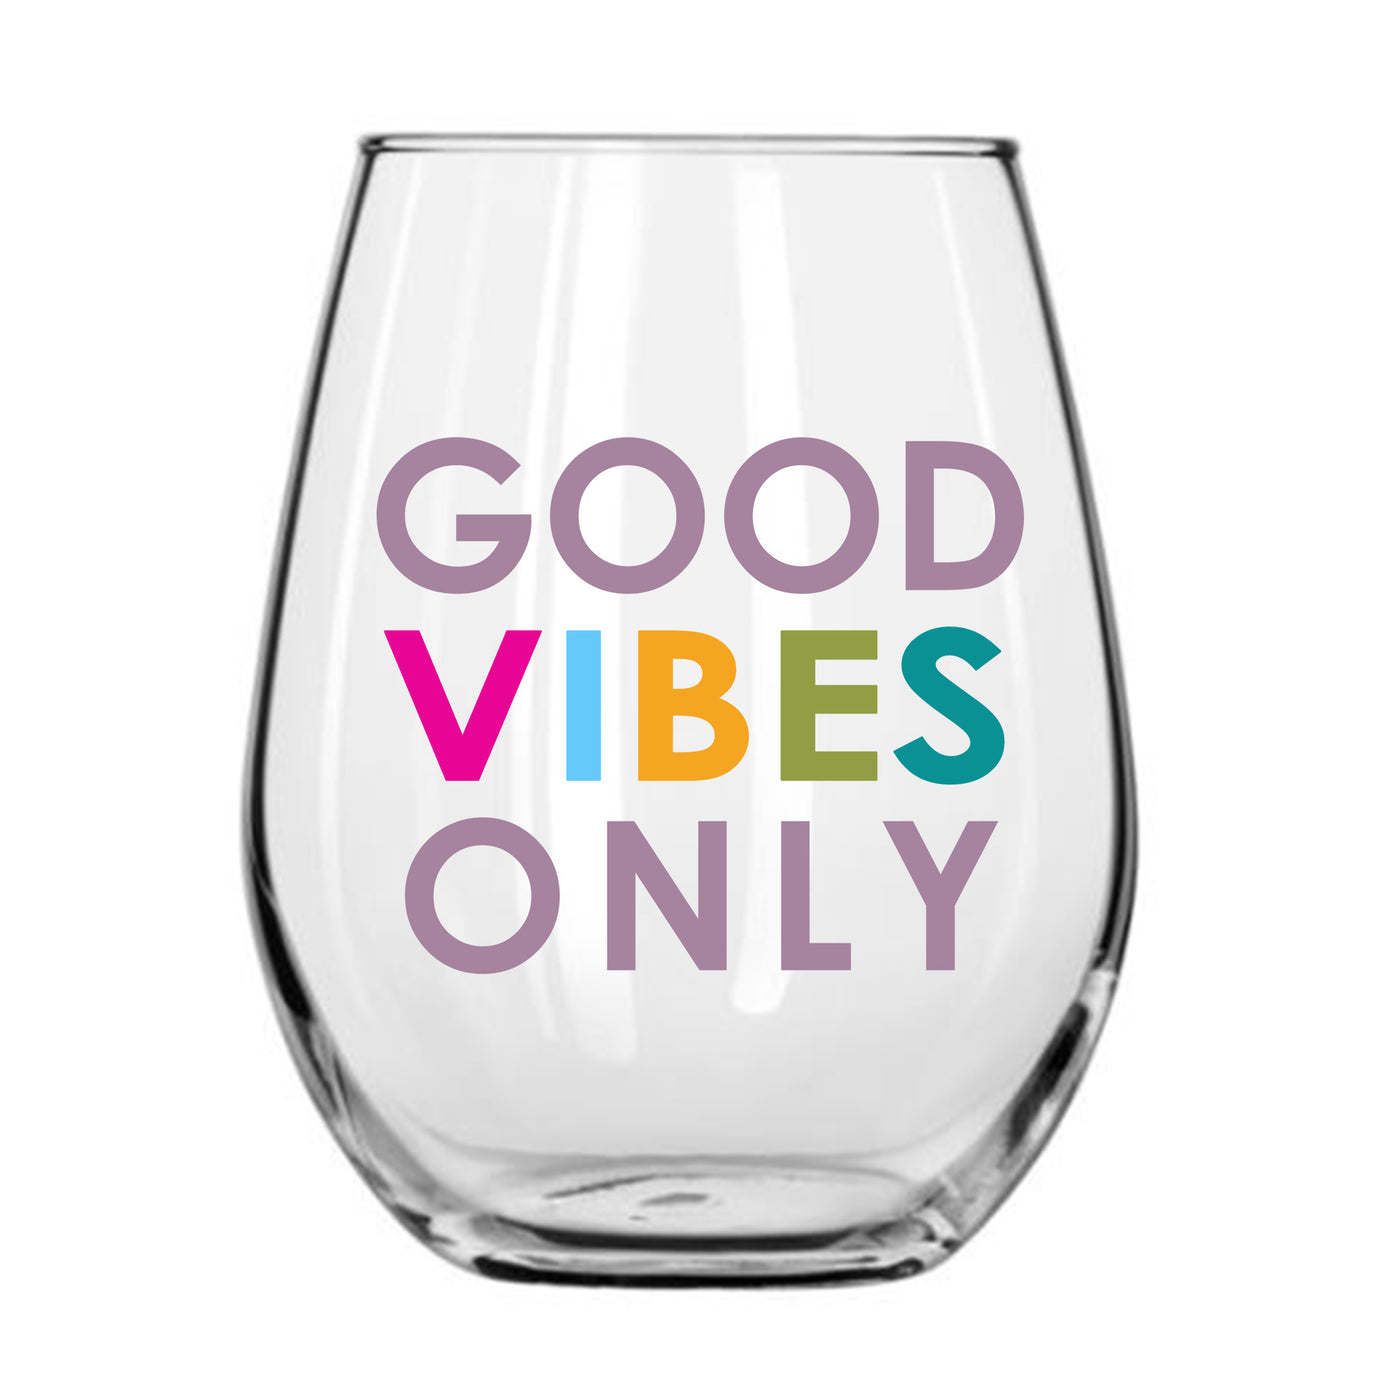 GOOD VIBES ONLY WINE GLASS